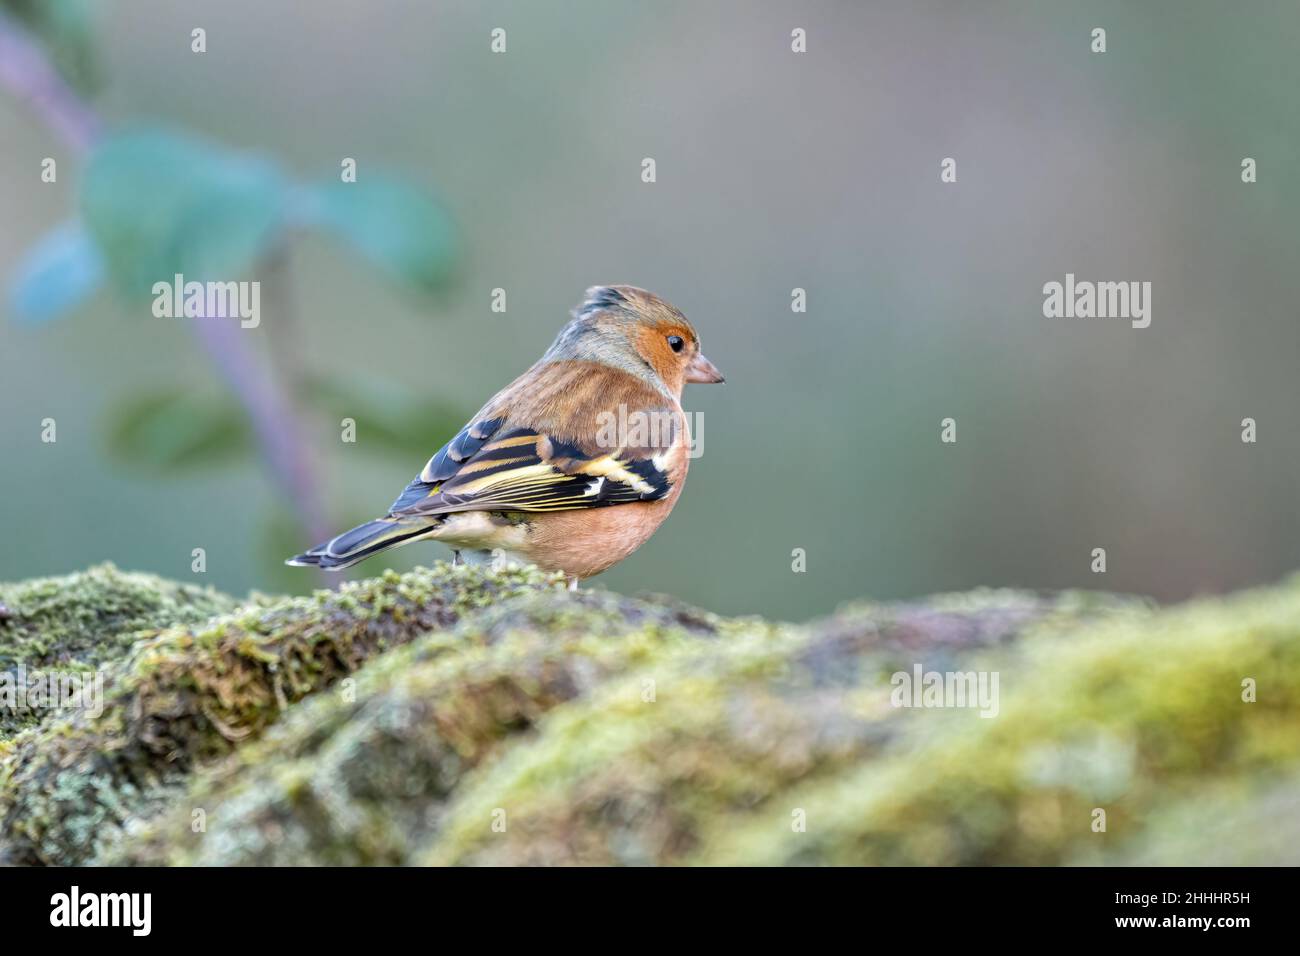 Male Chaffinch, or Common Chaffinch Fringilla coelebs feeding in a natural woodland setting during winter in the UK. Stock Photo